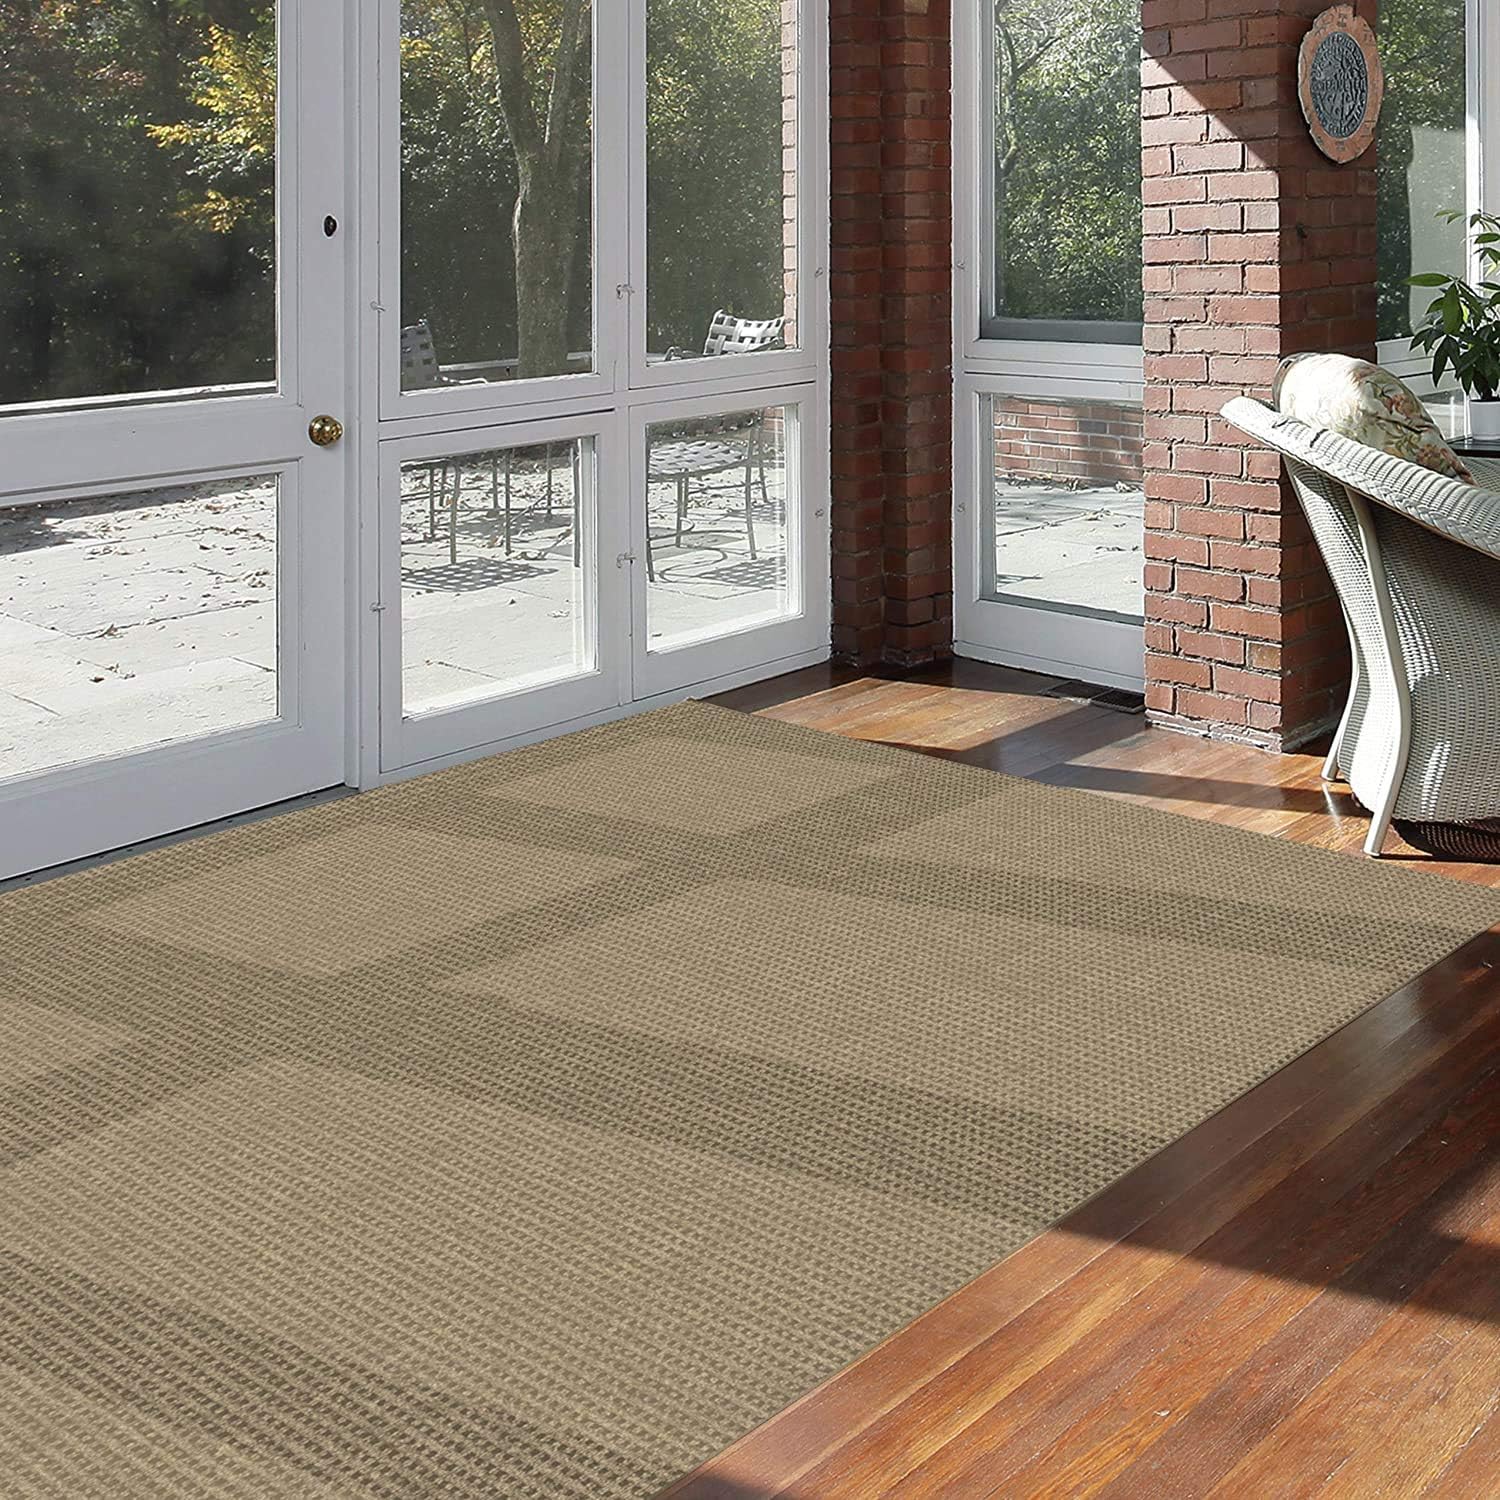 Koeckritz Rugs Soft and Durable Interlace Indoor - Outdoor Area Rugs Lightweight and Flexible (Color: Taupe)